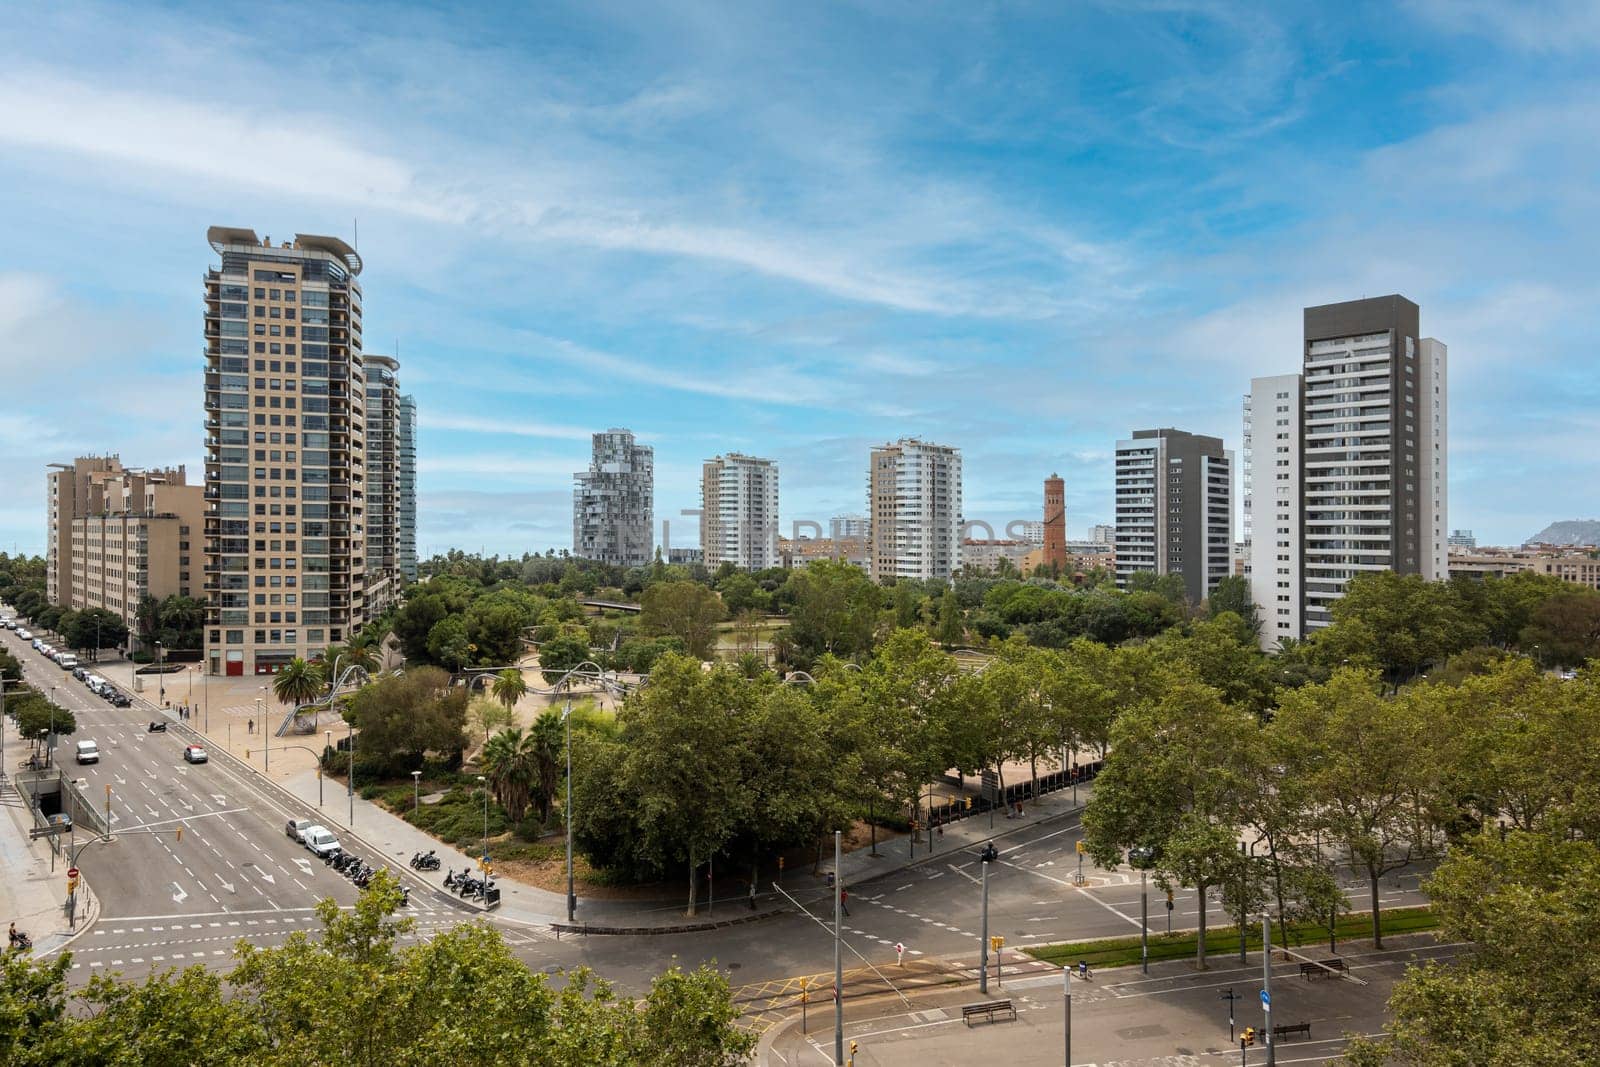 Aerial view of modern high-tech area of Barcelona - Diagonal Mar with high standard of living on the blue sky background. Concept of comfortable life in Spain near the sea.